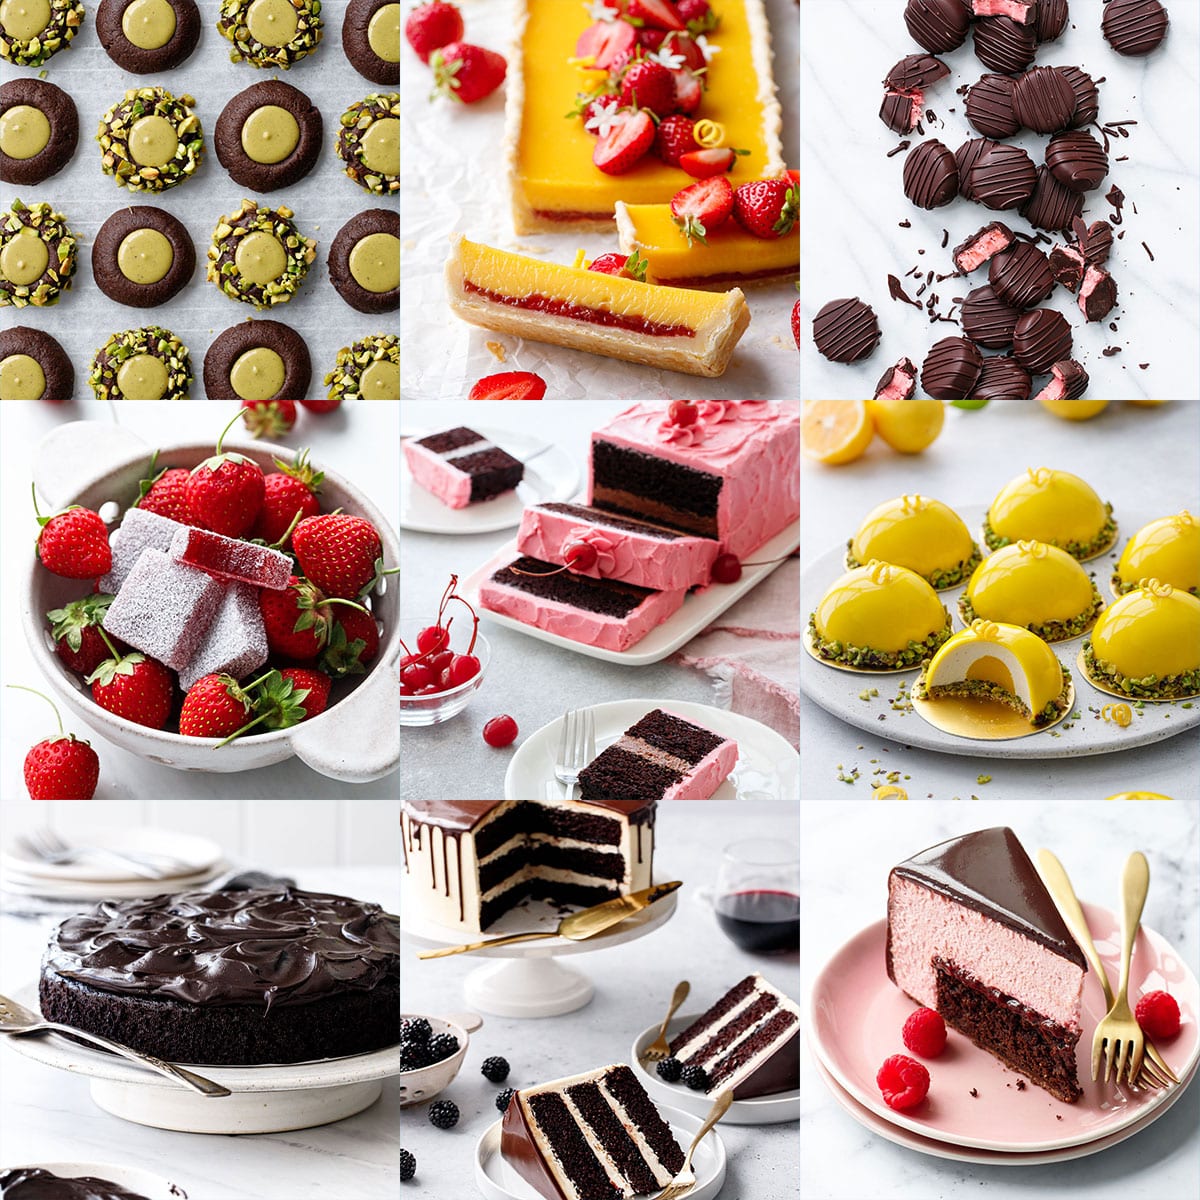 9x9 Grid of Images: This Year's Most Popular Recipes on Instagram 2023